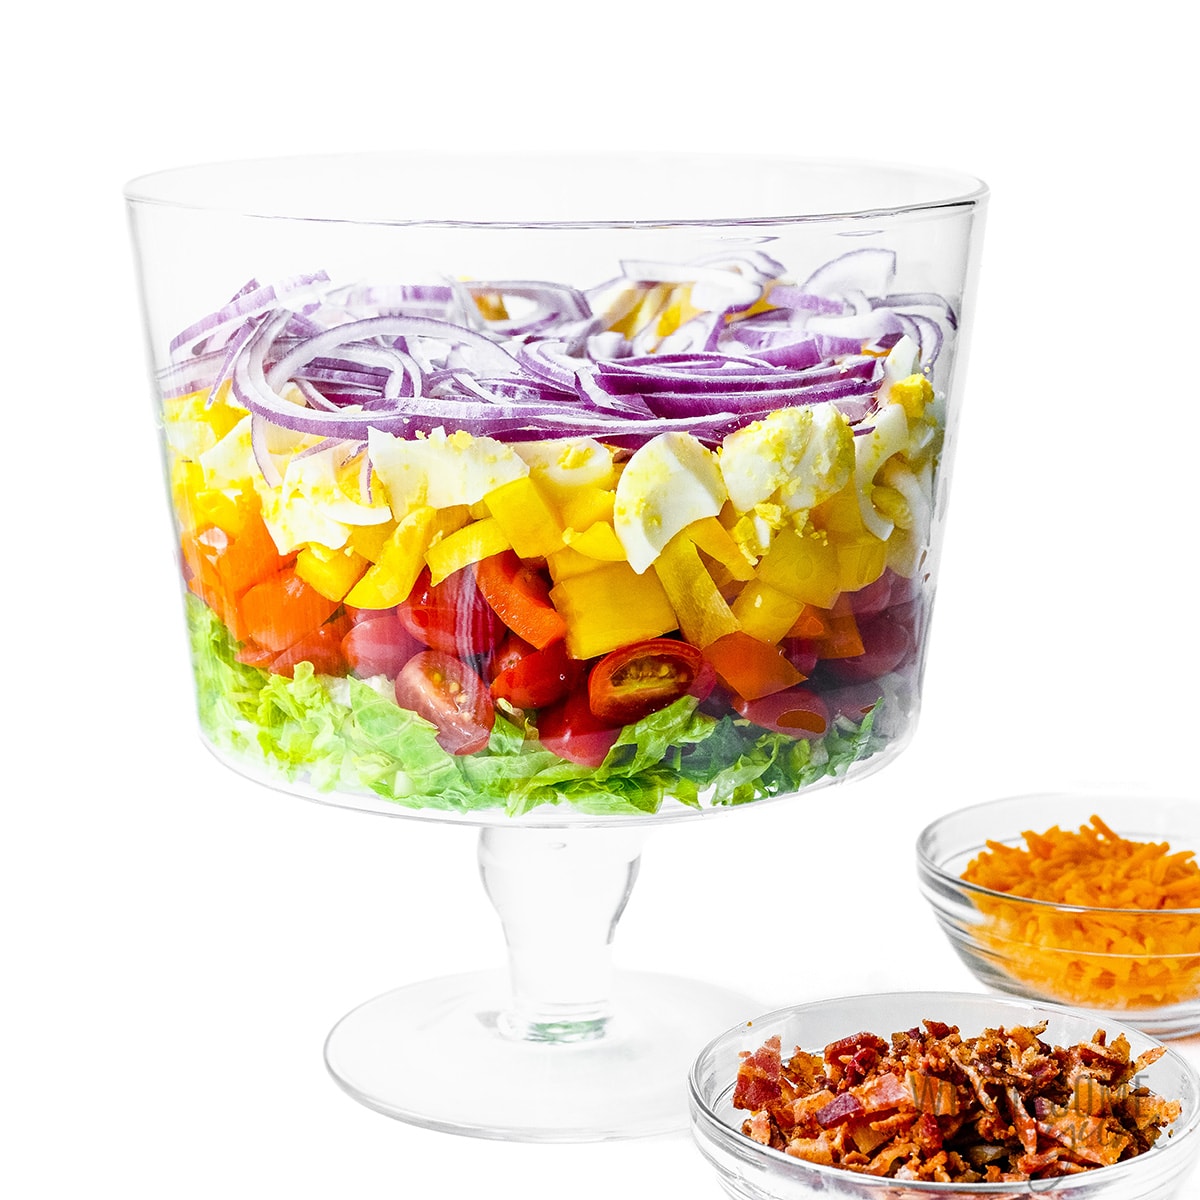 Veggies layered in a trifle bowl.